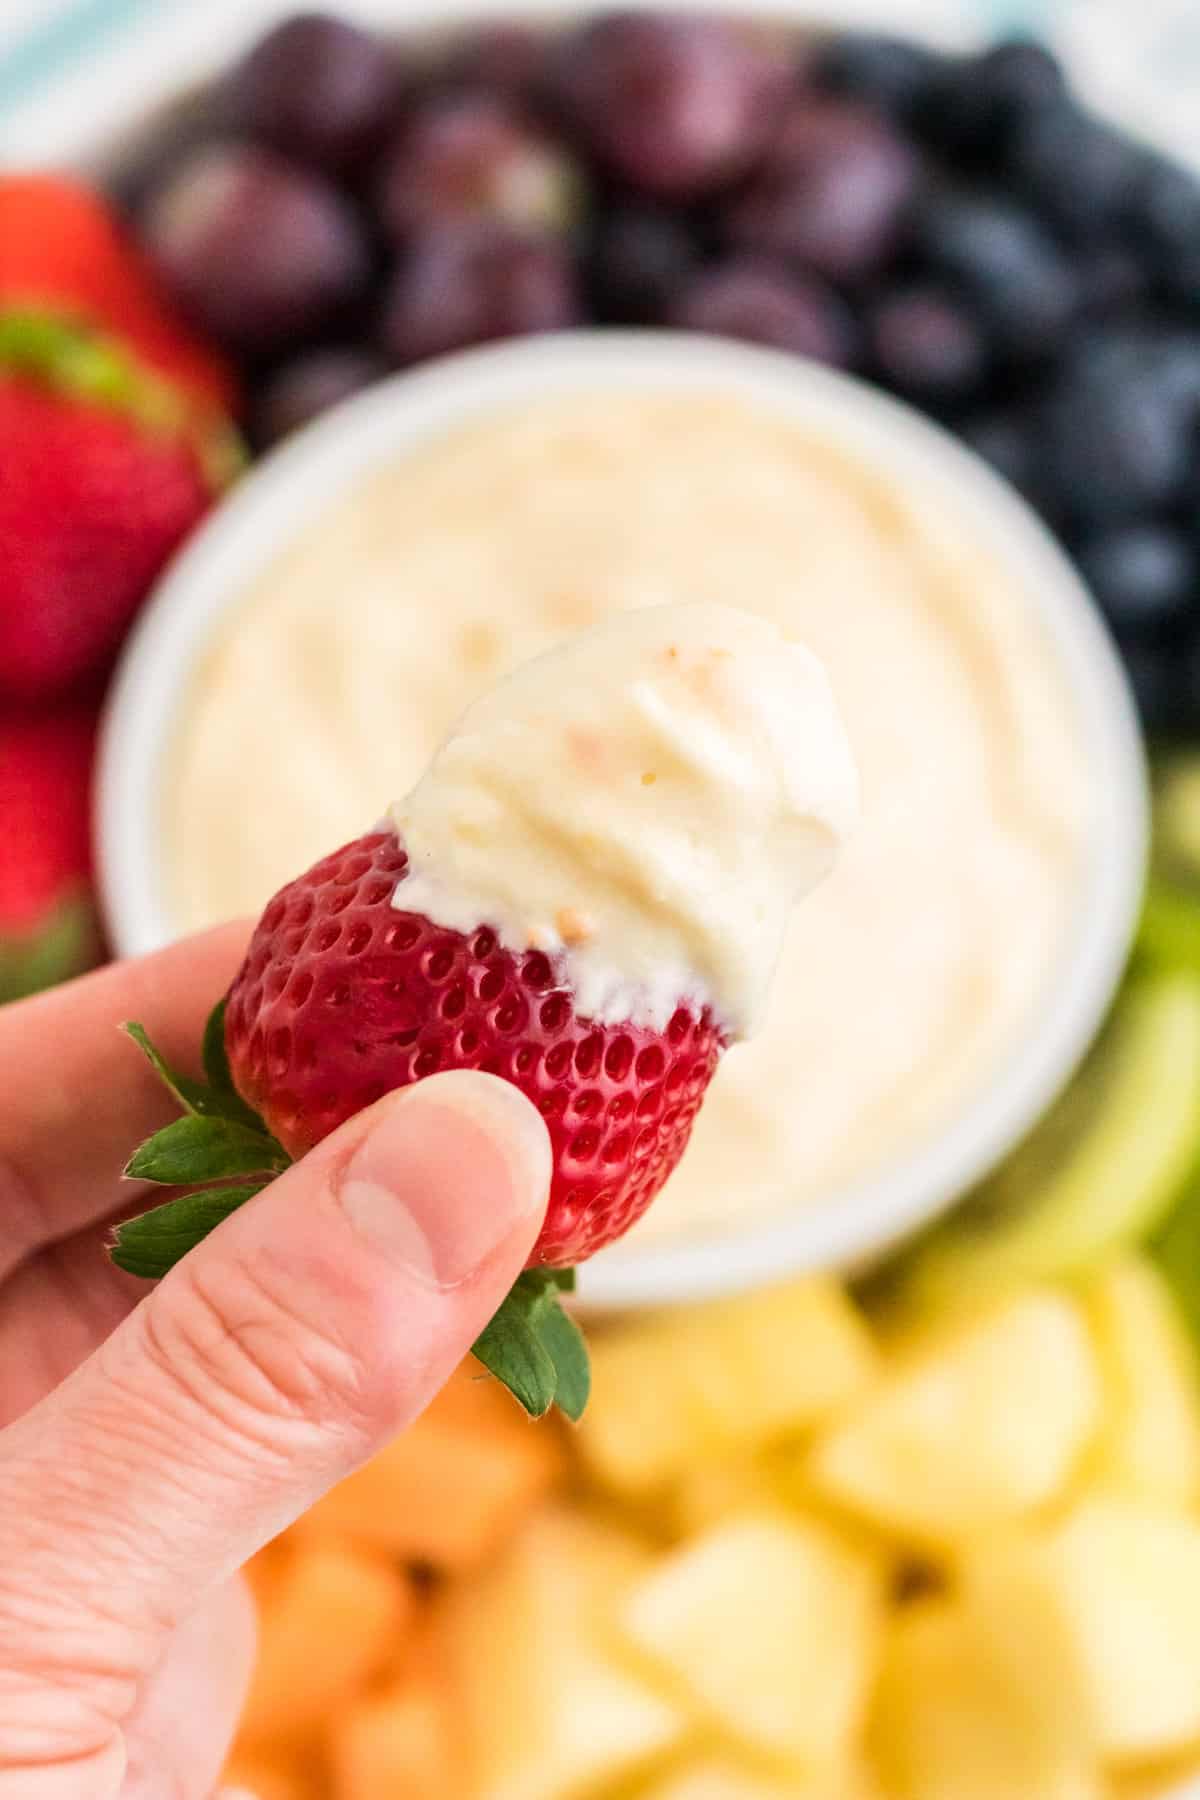 Strawberry dipped in cream cheese fruit dip.